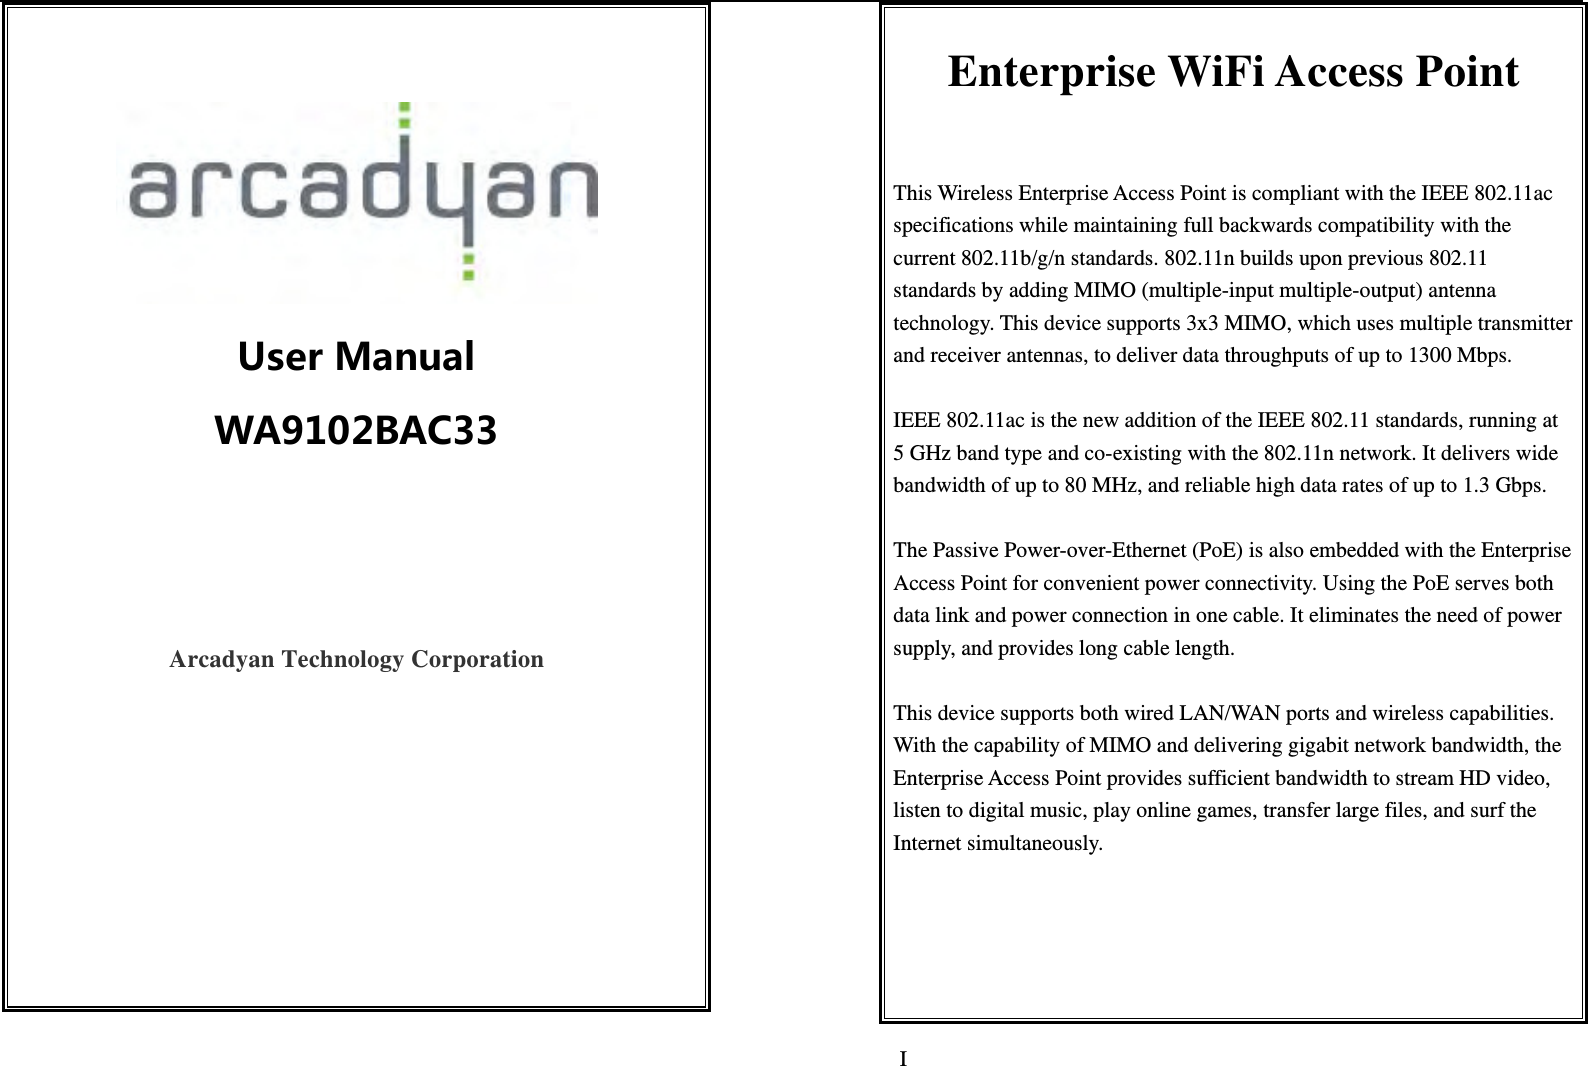   I     UserManualWA9102BAC33 Arcadyan Technology Corporation     Enterprise WiFi Access Point  This Wireless Enterprise Access Point is compliant with the IEEE 802.11ac specifications while maintaining full backwards compatibility with the current 802.11b/g/n standards. 802.11n builds upon previous 802.11 standards by adding MIMO (multiple-input multiple-output) antenna technology. This device supports 3x3 MIMO, which uses multiple transmitter and receiver antennas, to deliver data throughputs of up to 1300 Mbps.    IEEE 802.11ac is the new addition of the IEEE 802.11 standards, running at 5 GHz band type and co-existing with the 802.11n network. It delivers wide bandwidth of up to 80 MHz, and reliable high data rates of up to 1.3 Gbps.    The Passive Power-over-Ethernet (PoE) is also embedded with the Enterprise Access Point for convenient power connectivity. Using the PoE serves both data link and power connection in one cable. It eliminates the need of power supply, and provides long cable length.  This device supports both wired LAN/WAN ports and wireless capabilities. With the capability of MIMO and delivering gigabit network bandwidth, the Enterprise Access Point provides sufficient bandwidth to stream HD video, listen to digital music, play online games, transfer large files, and surf the Internet simultaneously.     